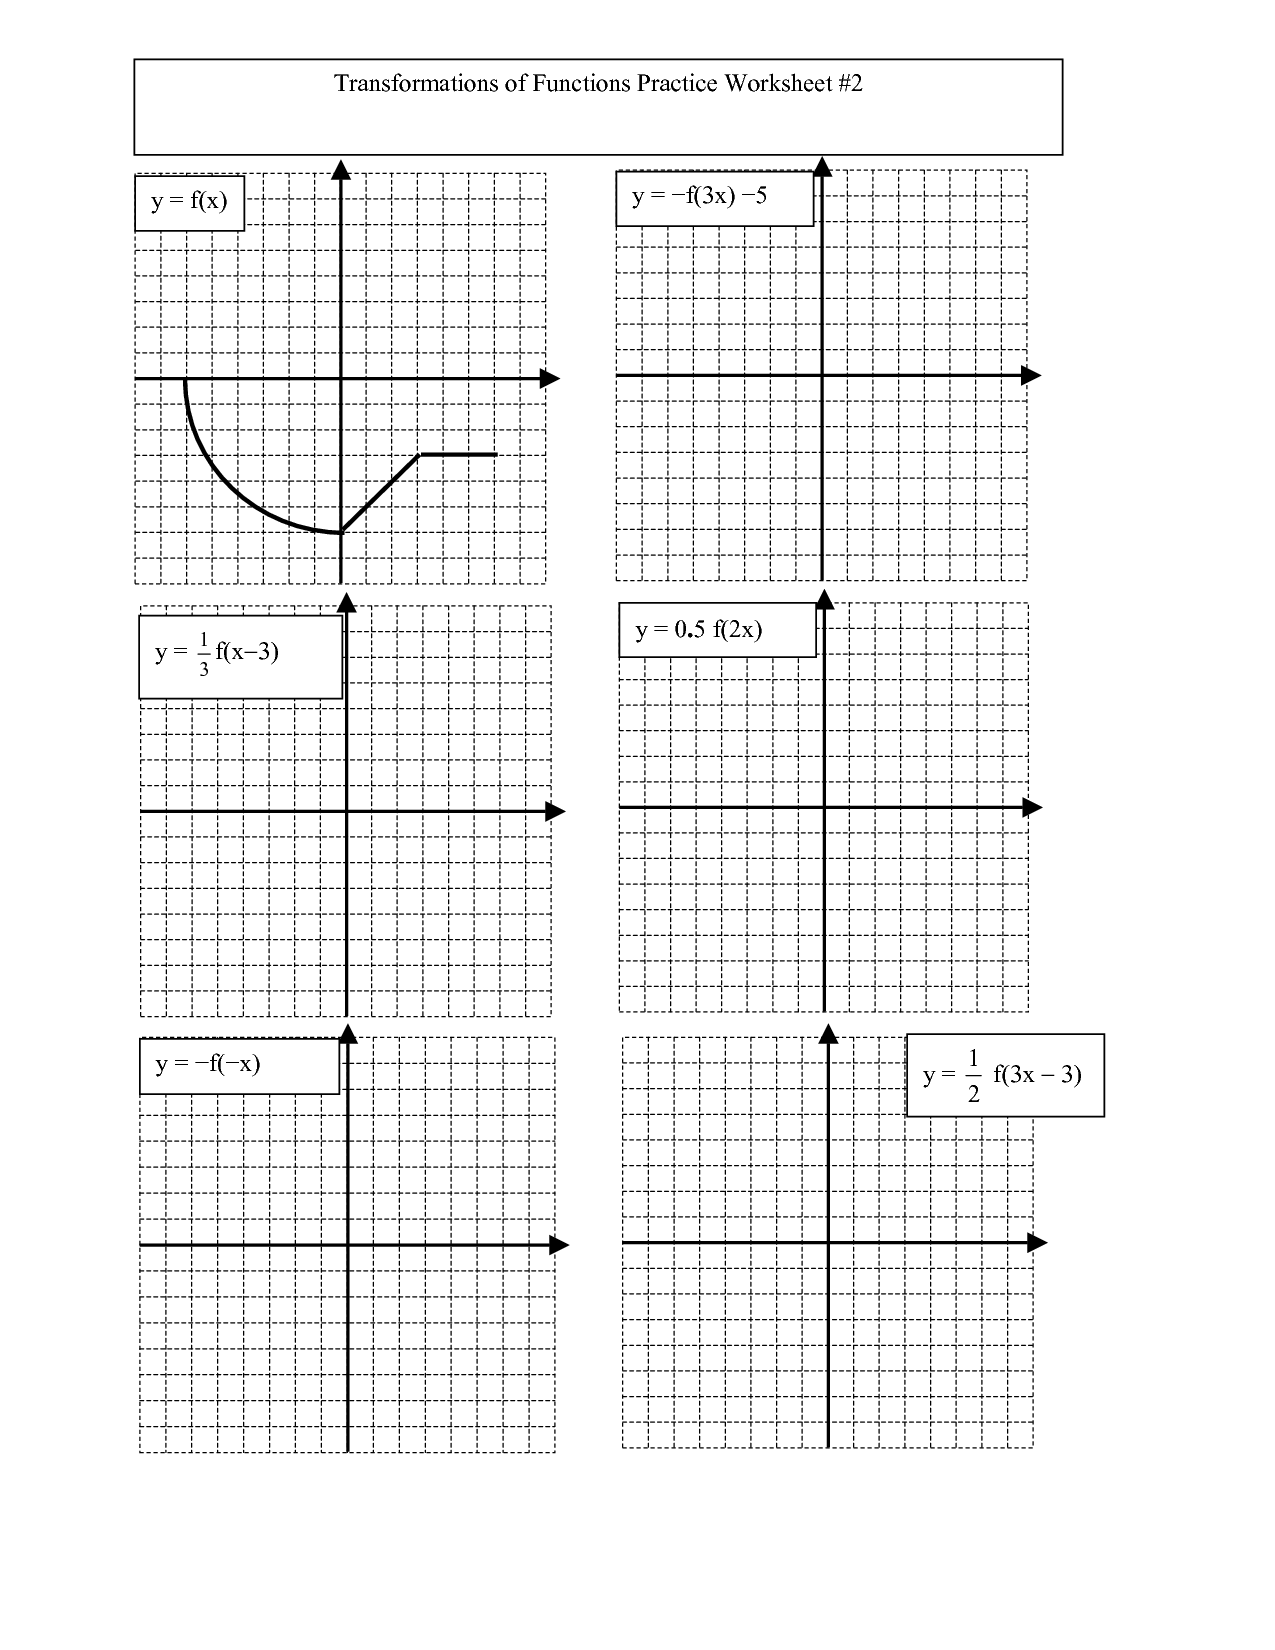 Transformations of Functions Graphs Worksheet Image